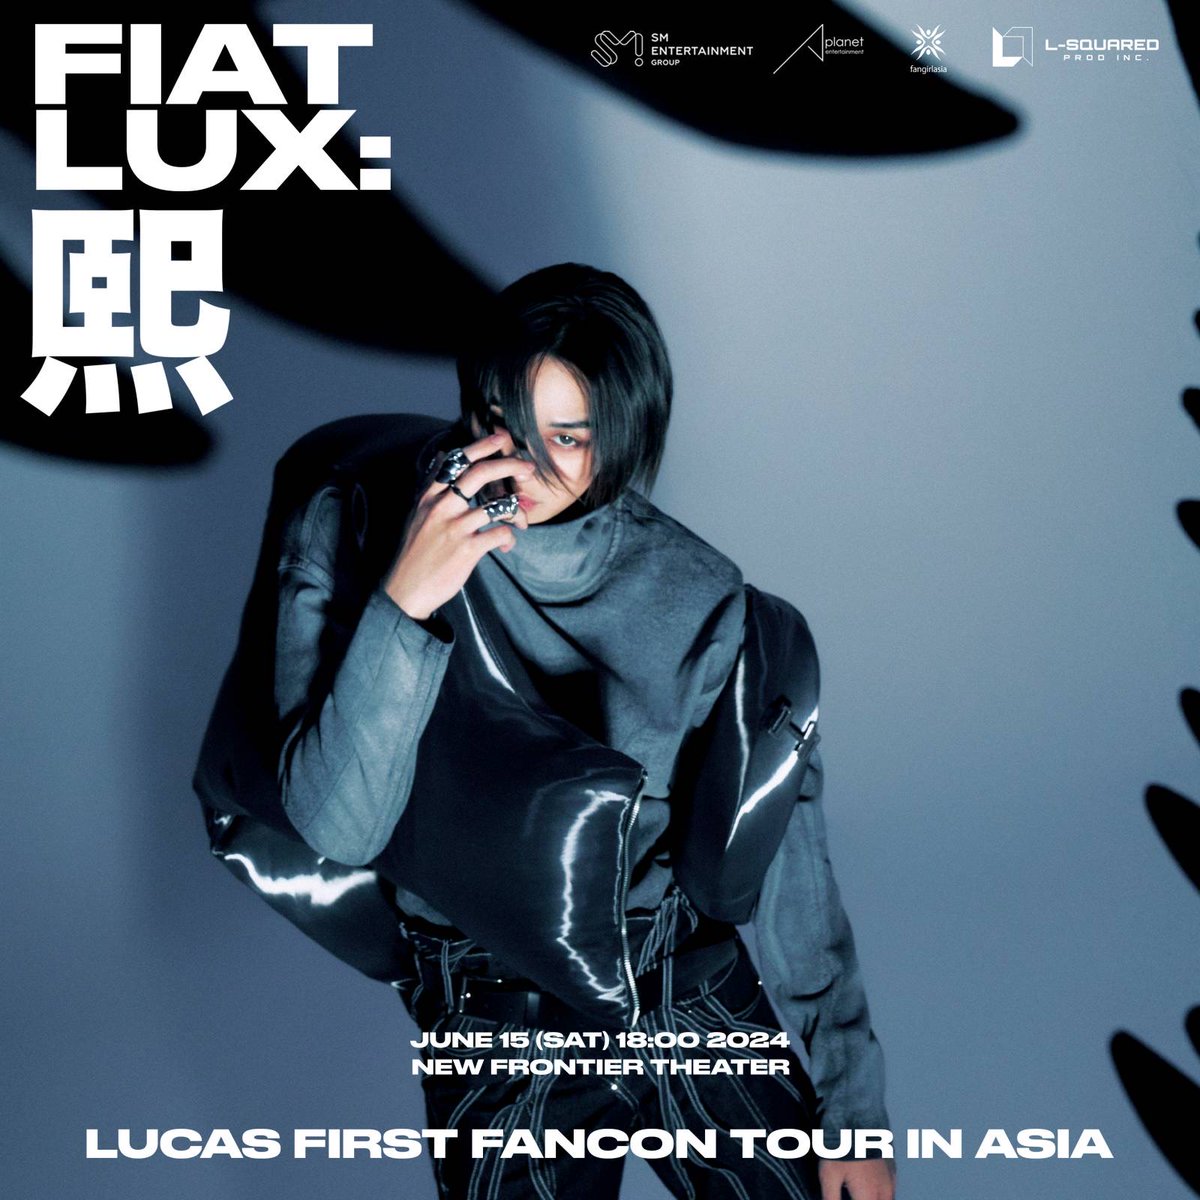 ONE DAY BEFORE TICKET SELLING FOR LUCAS FANCON TOUR IN ASIA <FIAT LUX : 熙> - MANILA! 🦁

May this ticketing day be your holidate with Lucas!
🗓️ May 1, 2024 | 10AM
🎟️ Ticketnet.com.ph

#LucasFirstFanconTourInManila by @LSquaredProdPH
#LUCAS #FIATLUX